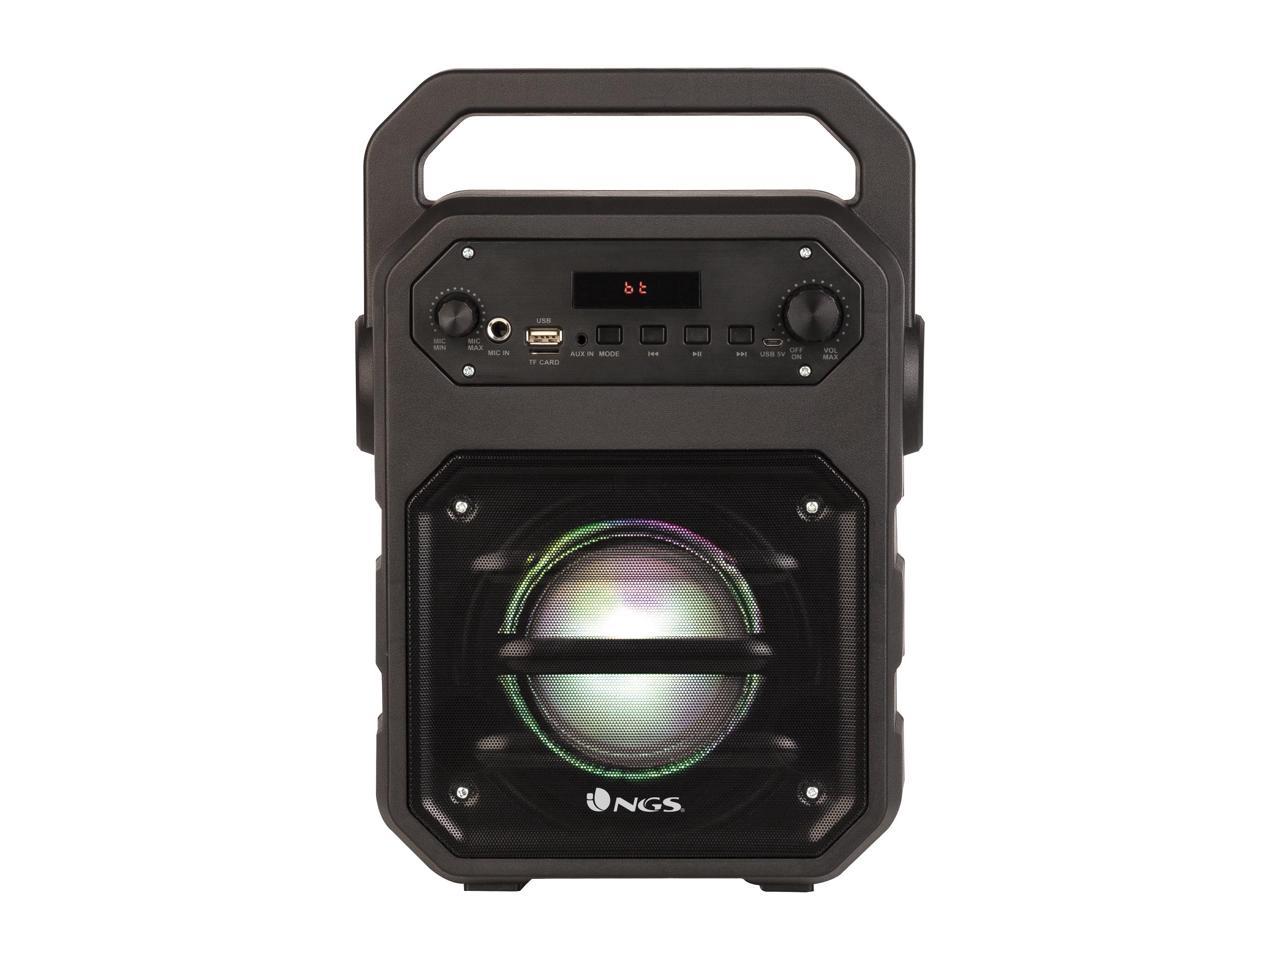 NGS 20W Roller Drum BT Speaker with FM Radio, Aux Input and MicroSD Slot